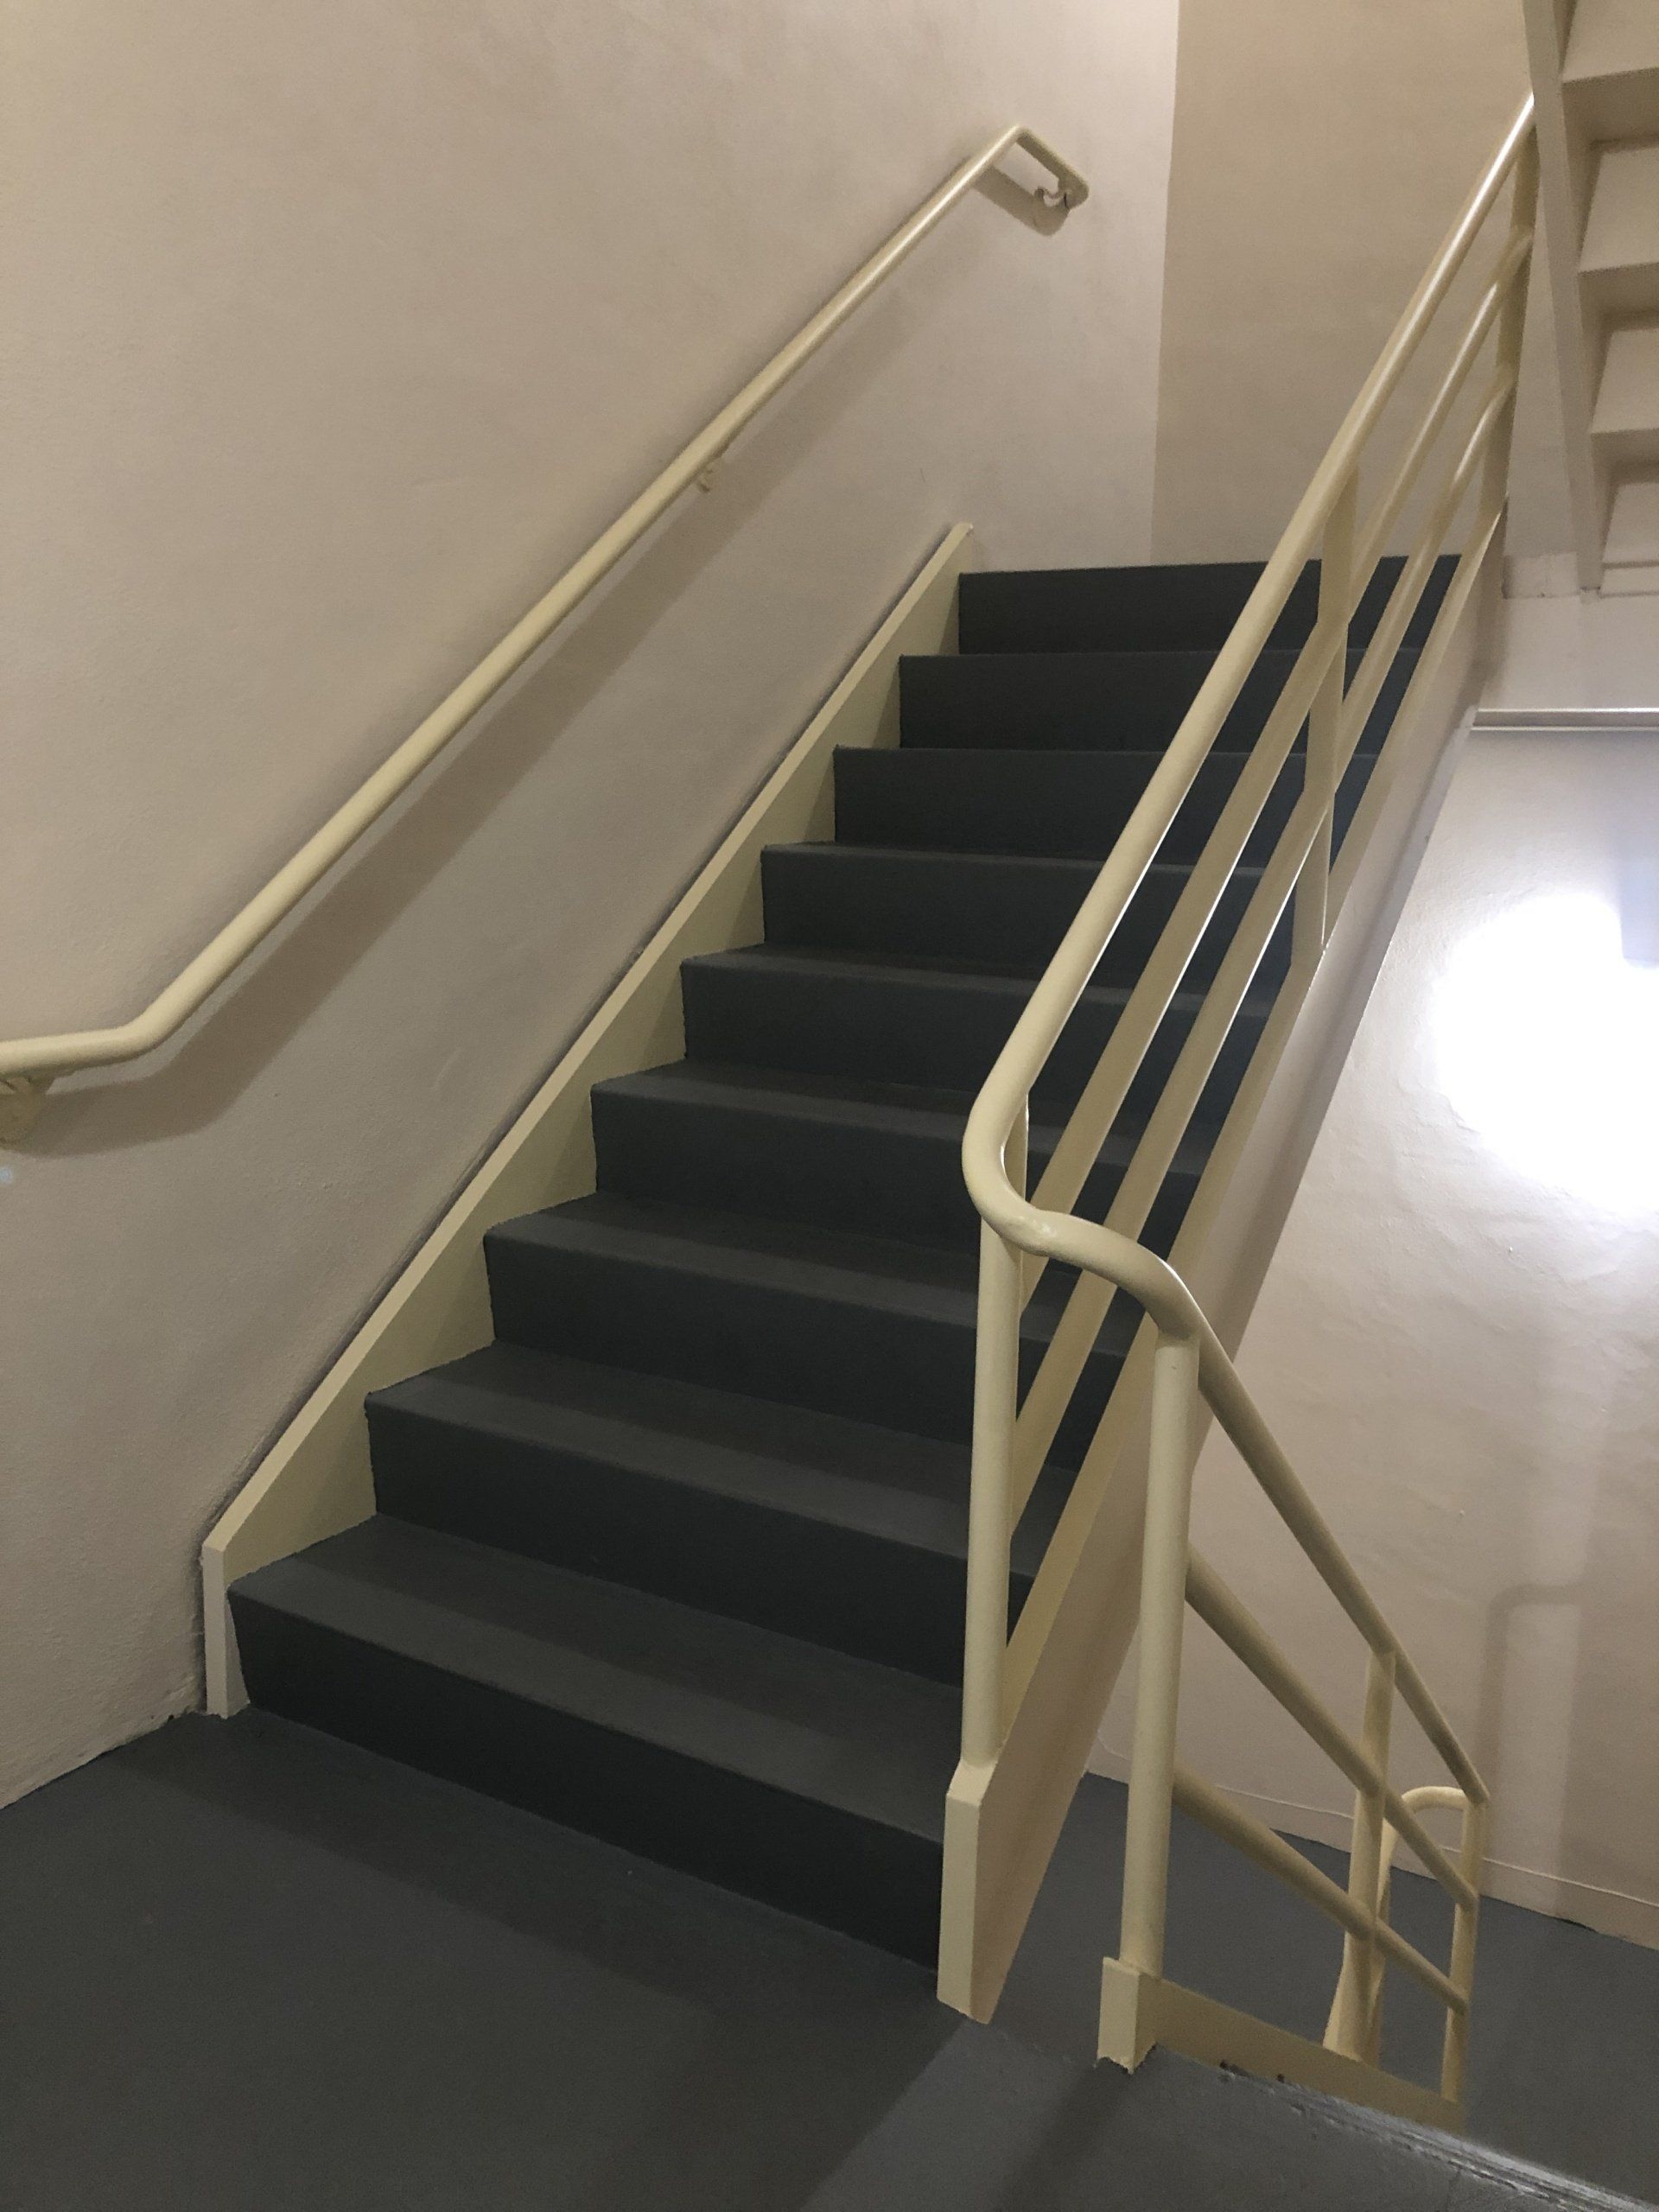 indoor office building stairwell with metal handrails leading to an exit